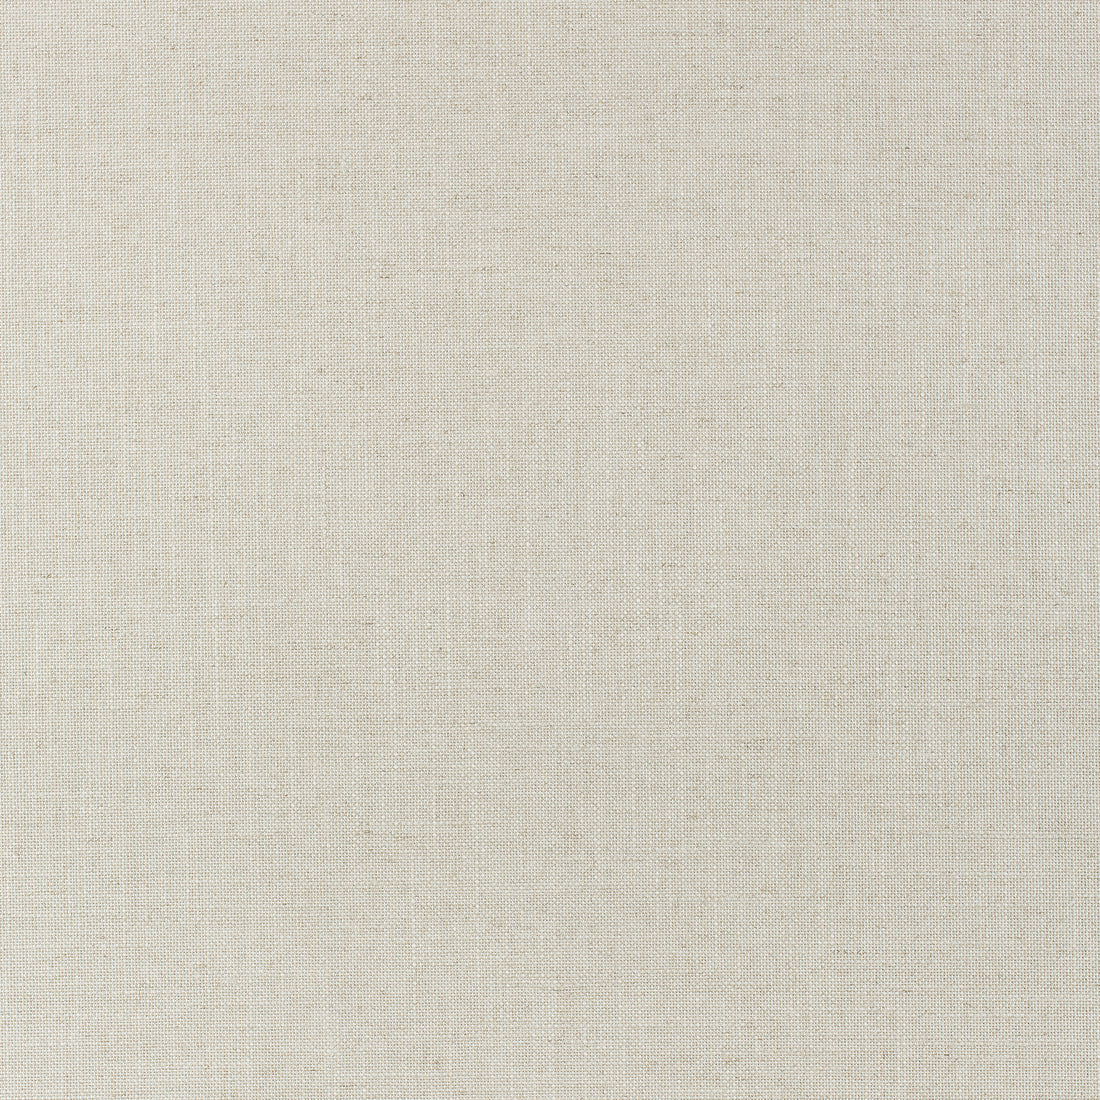 Lira fabric in flax color - pattern number W80463 - by Thibaut in the Mosaic collection